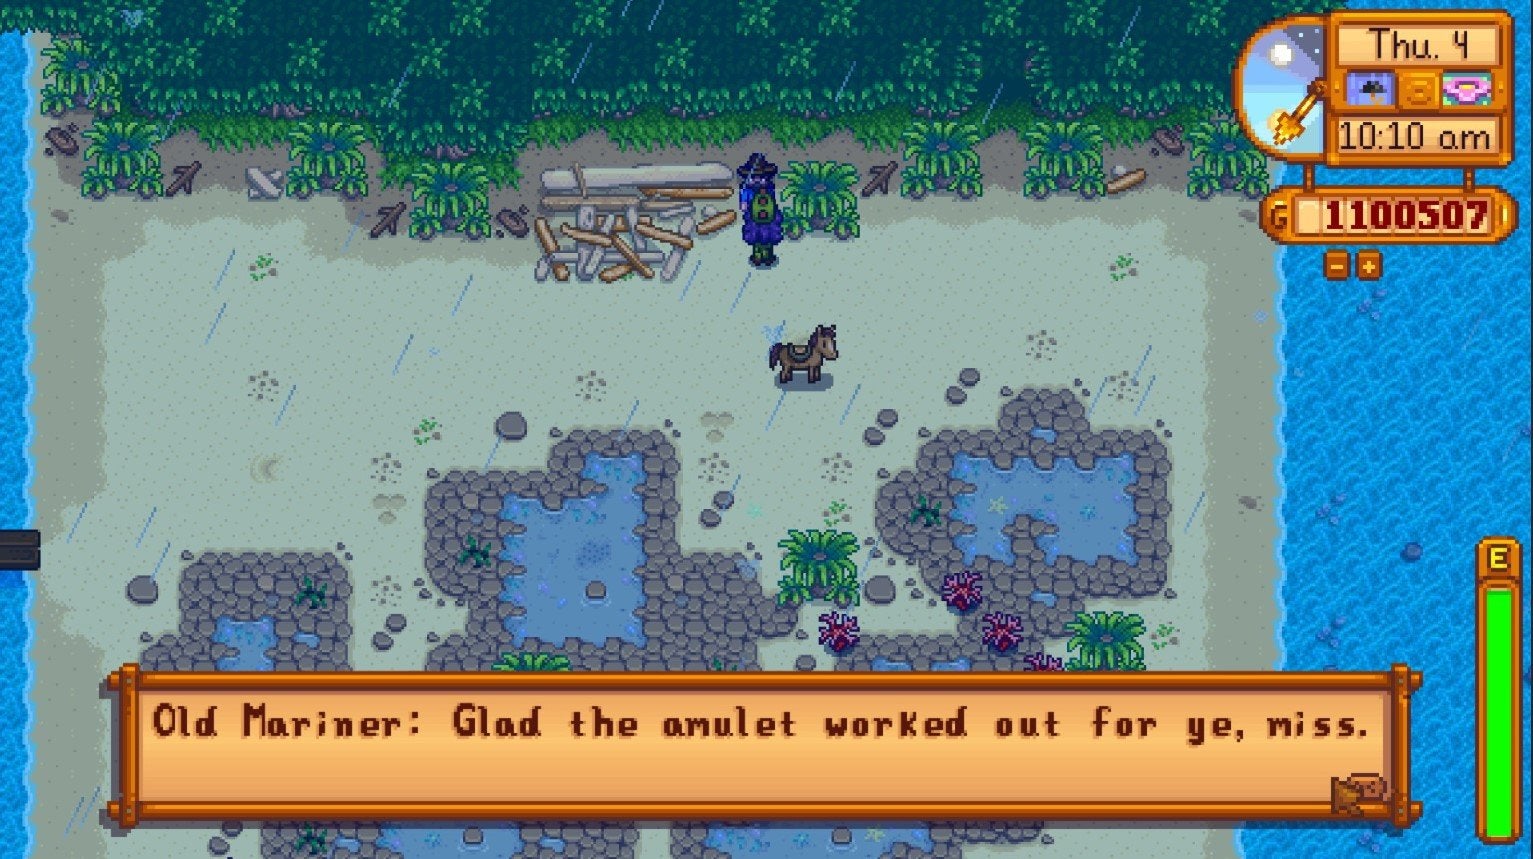 The Old Mariner in Stardew Valley, who sells the Mermaid's Pendant.